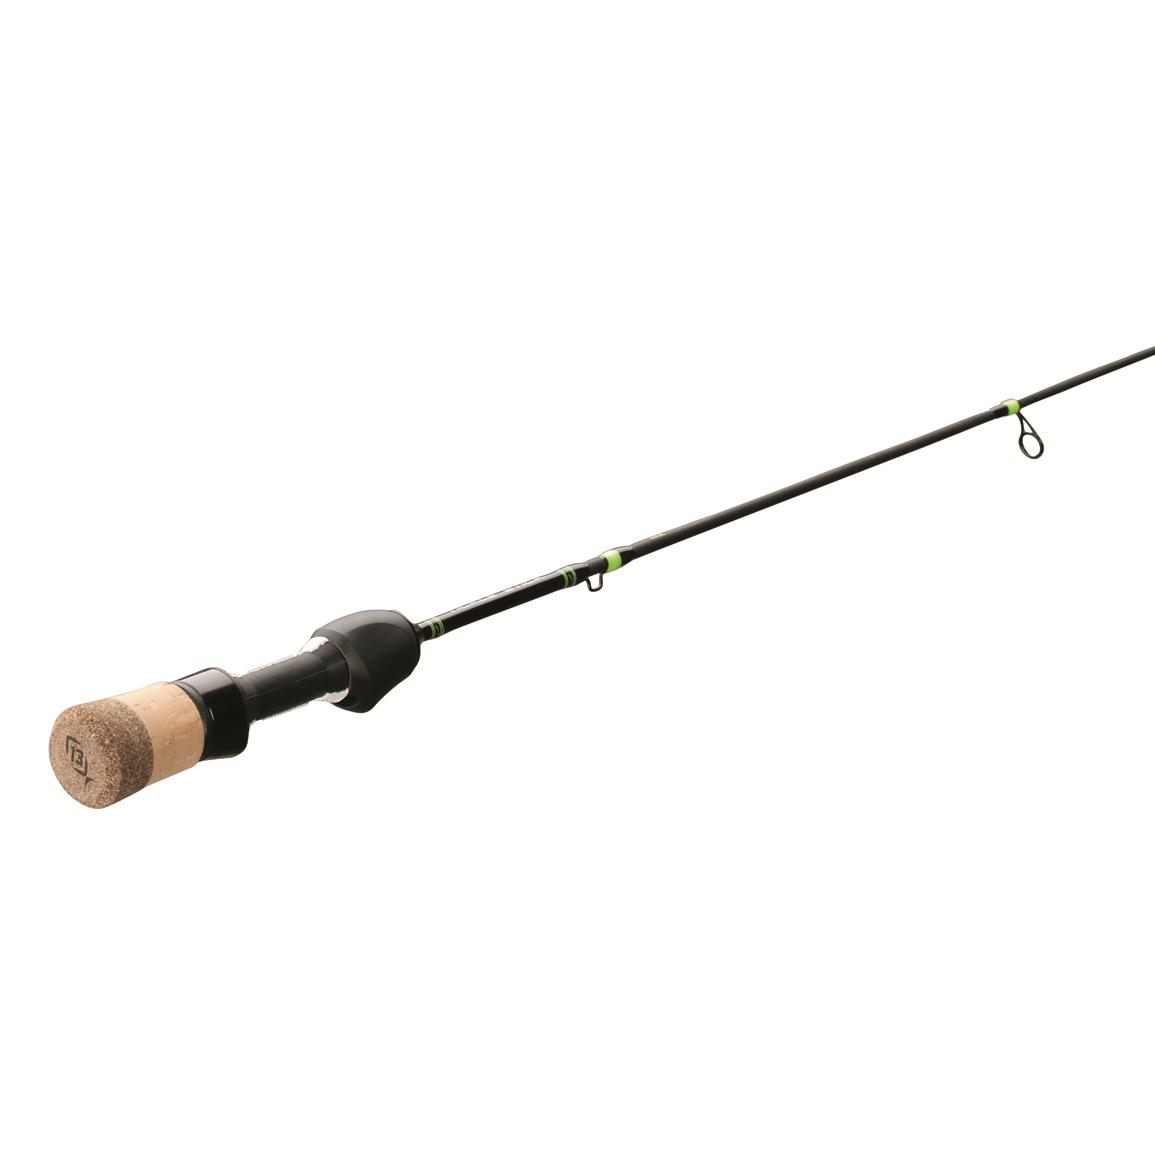 St. Croix Mojo Series Ice Fishing Rod, 34, Medium Heavy Power - 723871, Ice  Fishing Rods at Sportsman's Guide